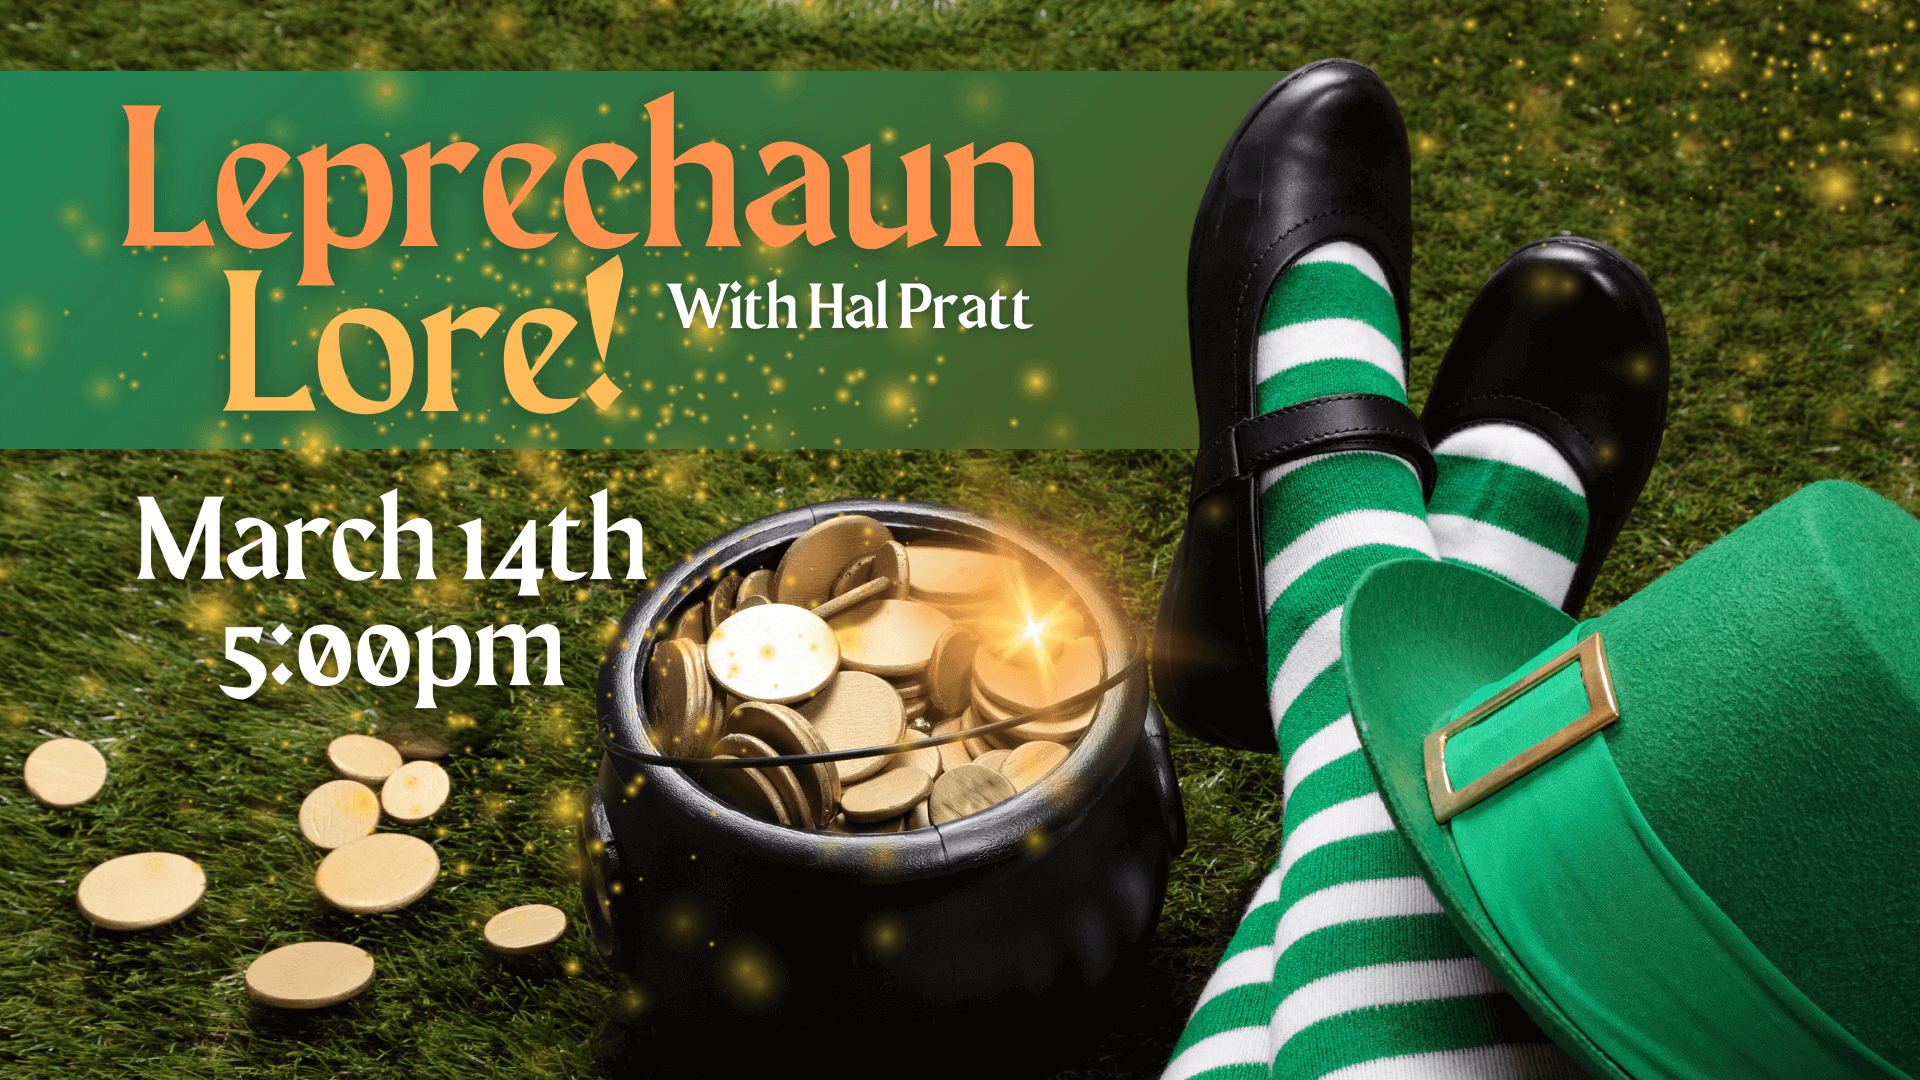 Leprechaun Lore! With Hal Pratt March 14th at 5pm - picture of leprechaun legs, hat, and pot of gold